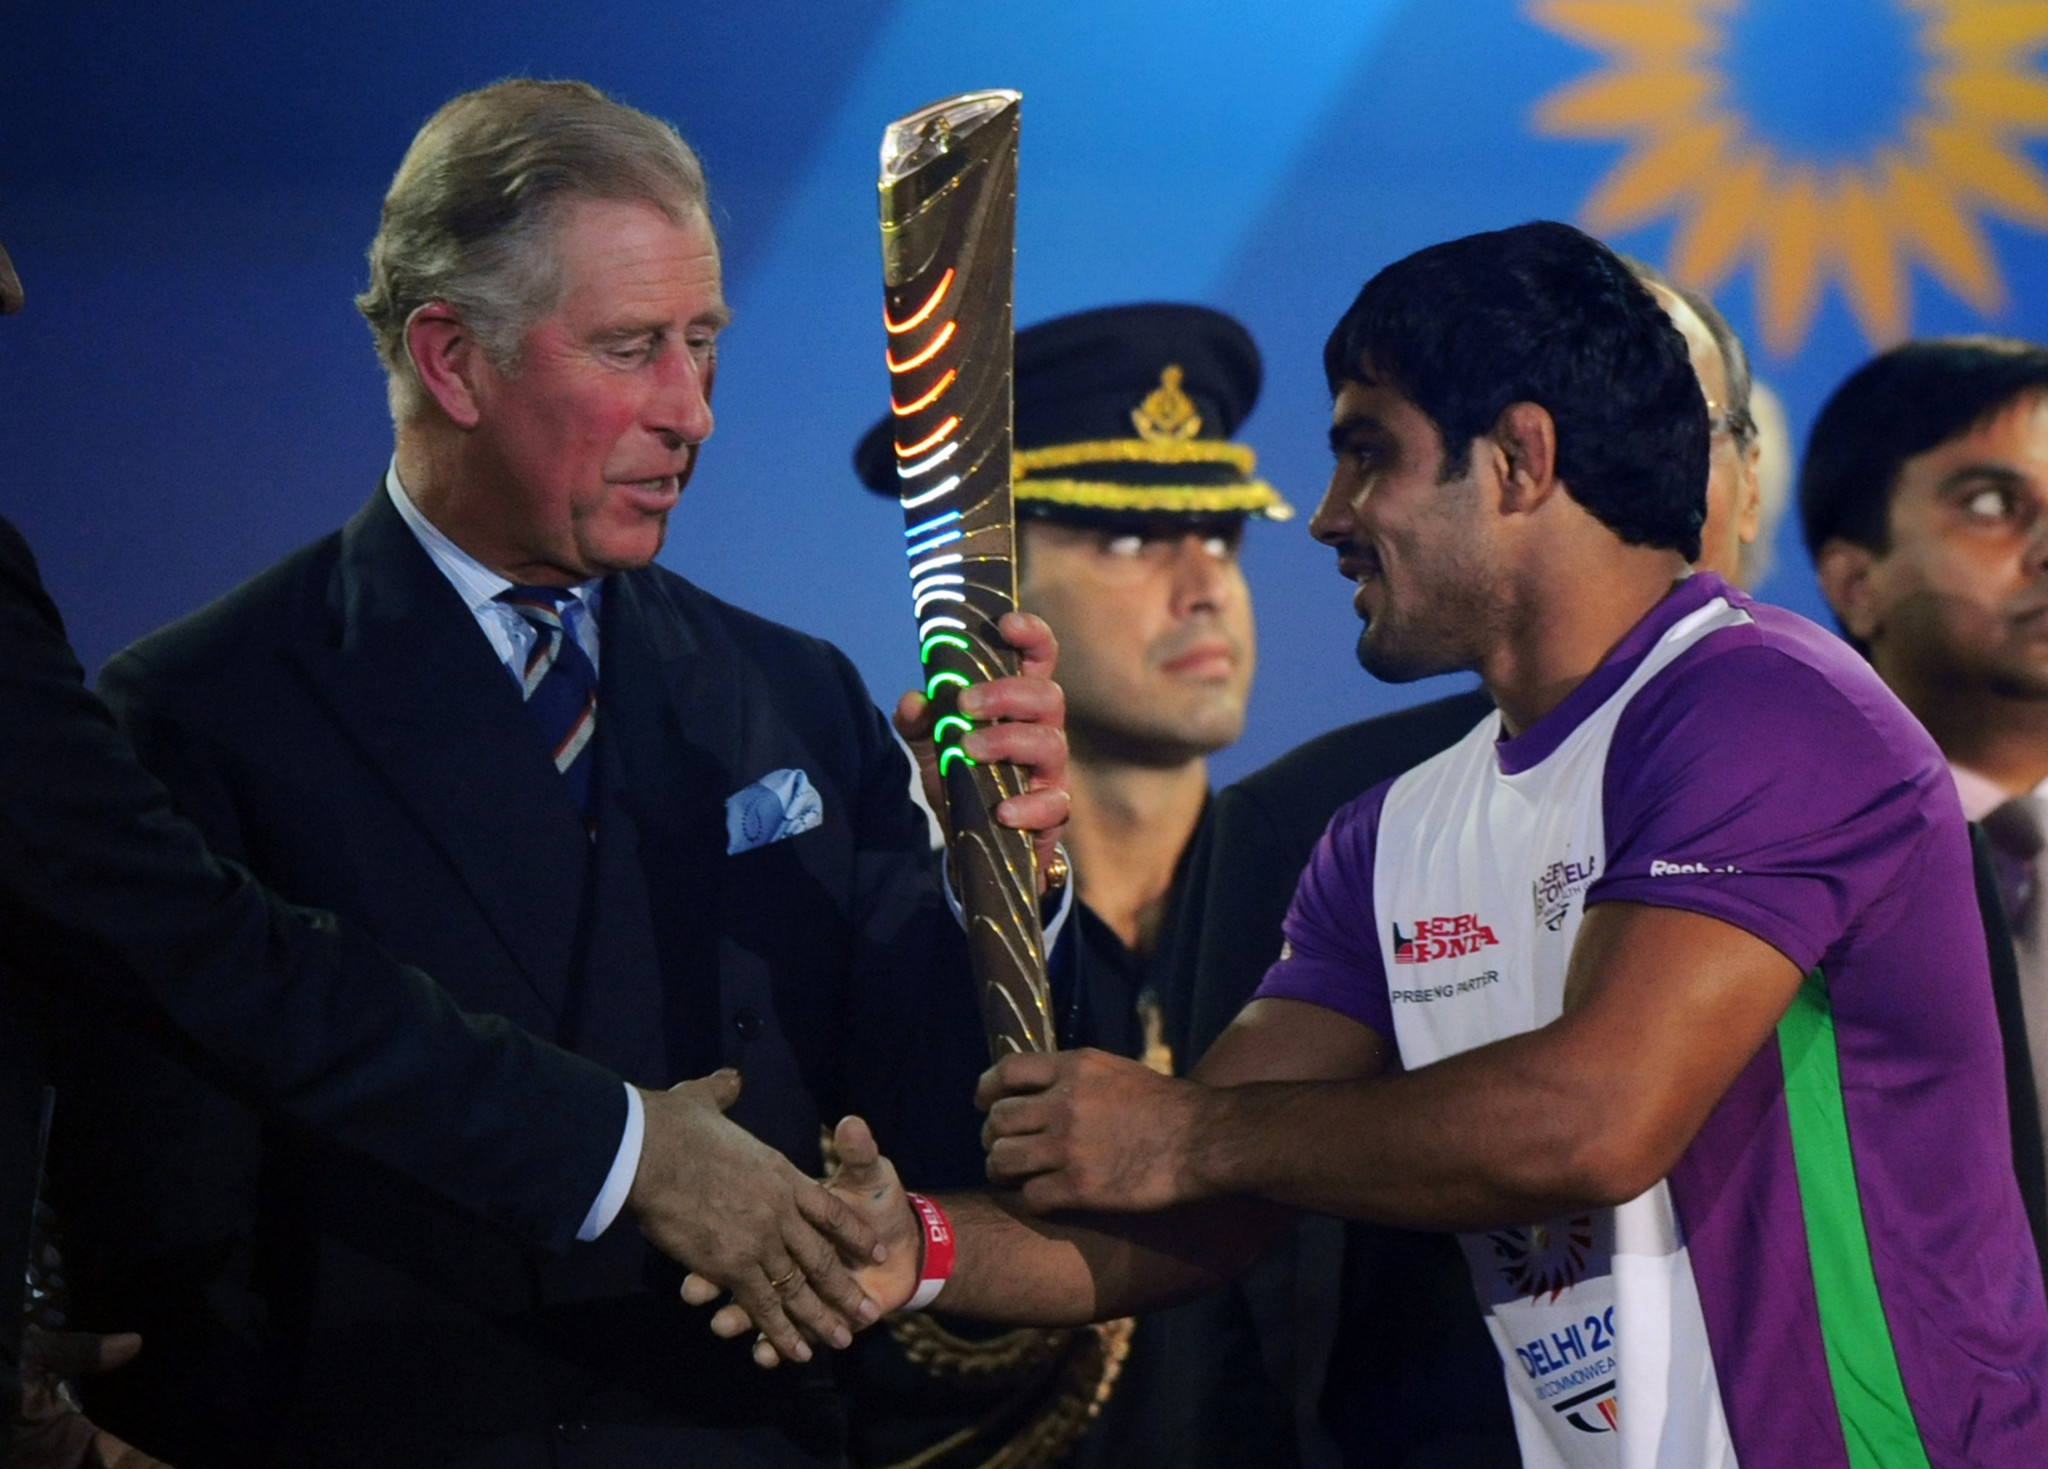 Sushil Kumar handed the Baton to Prince Charles at the 2010 Commonwealth Games in Delhi ©Getty Images